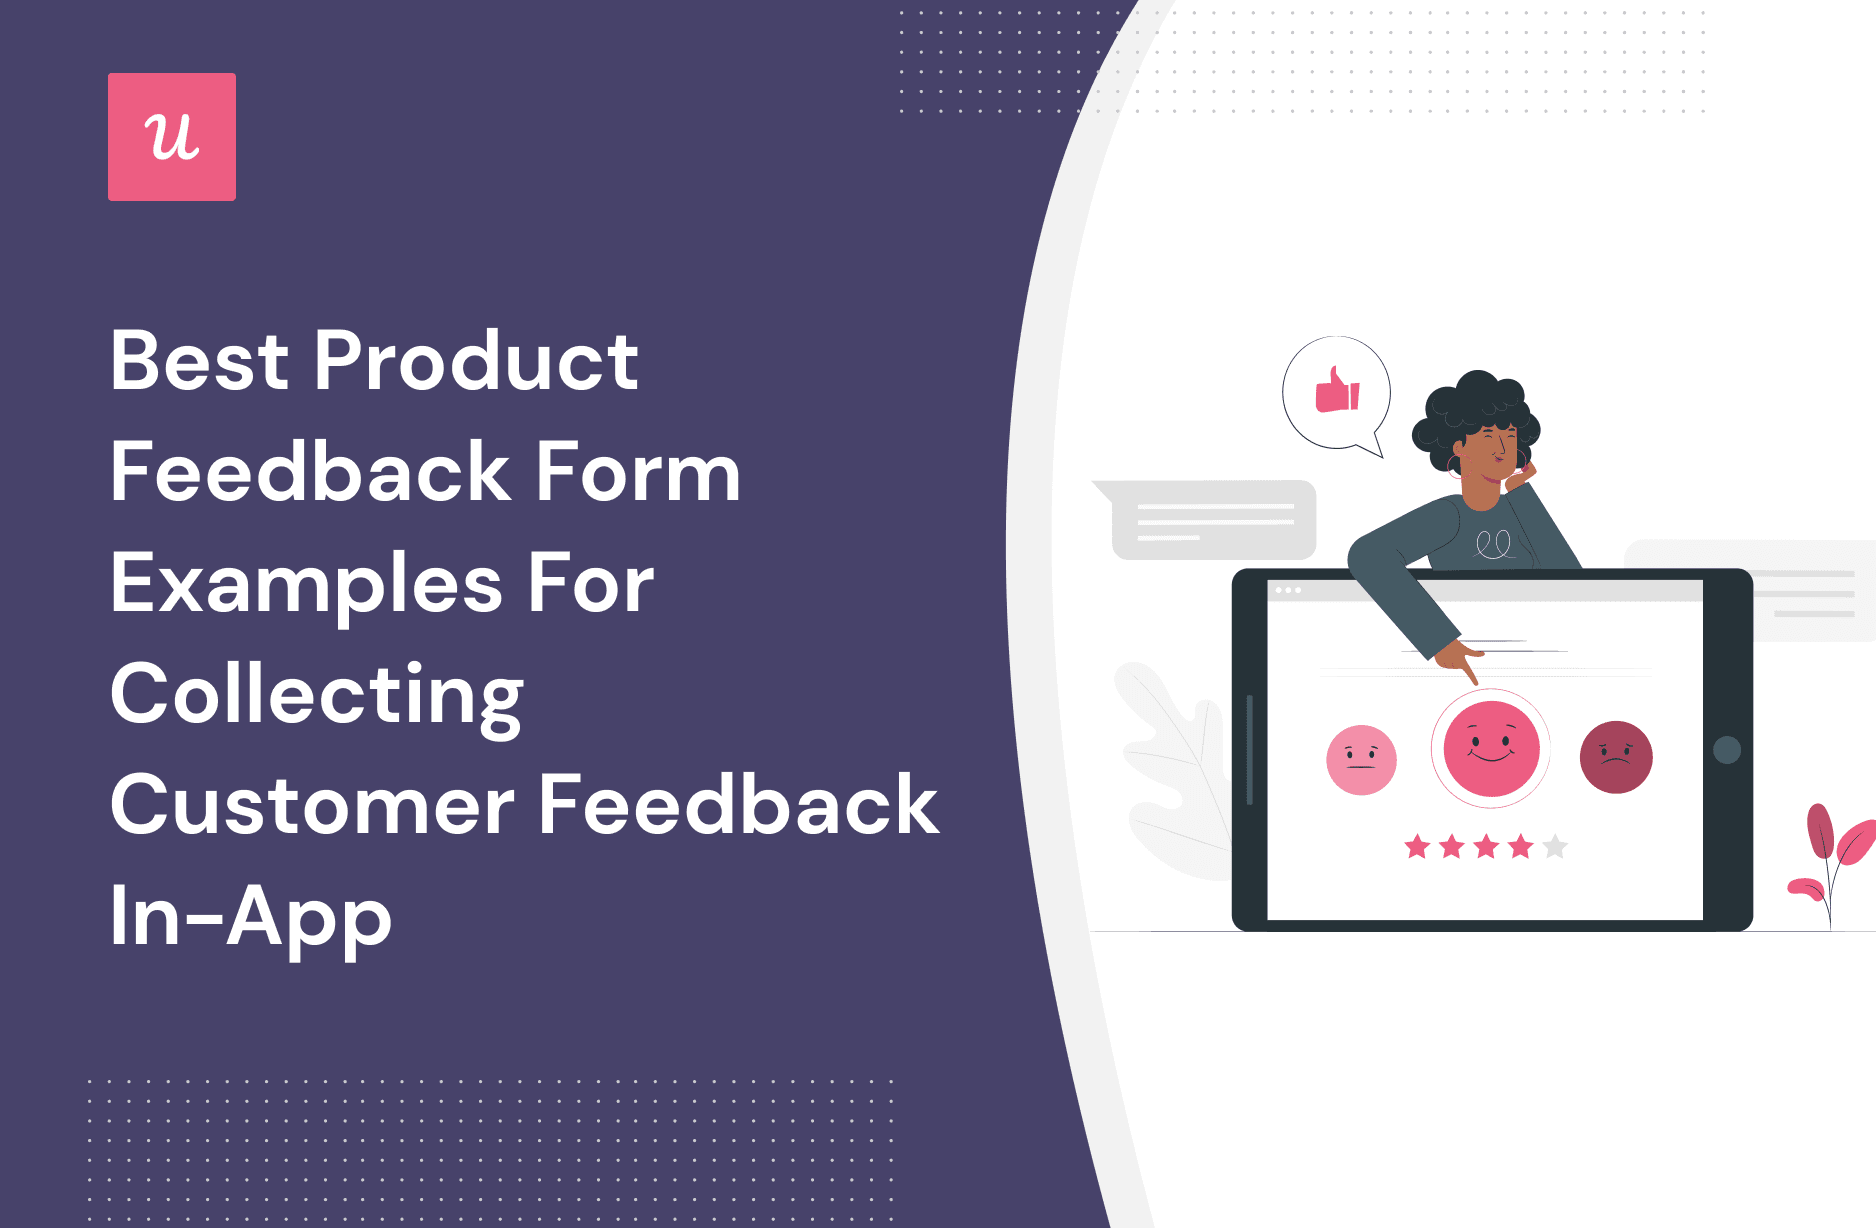 Best Product Feedback Form Examples For Collecting Customer Feedback In-app cover